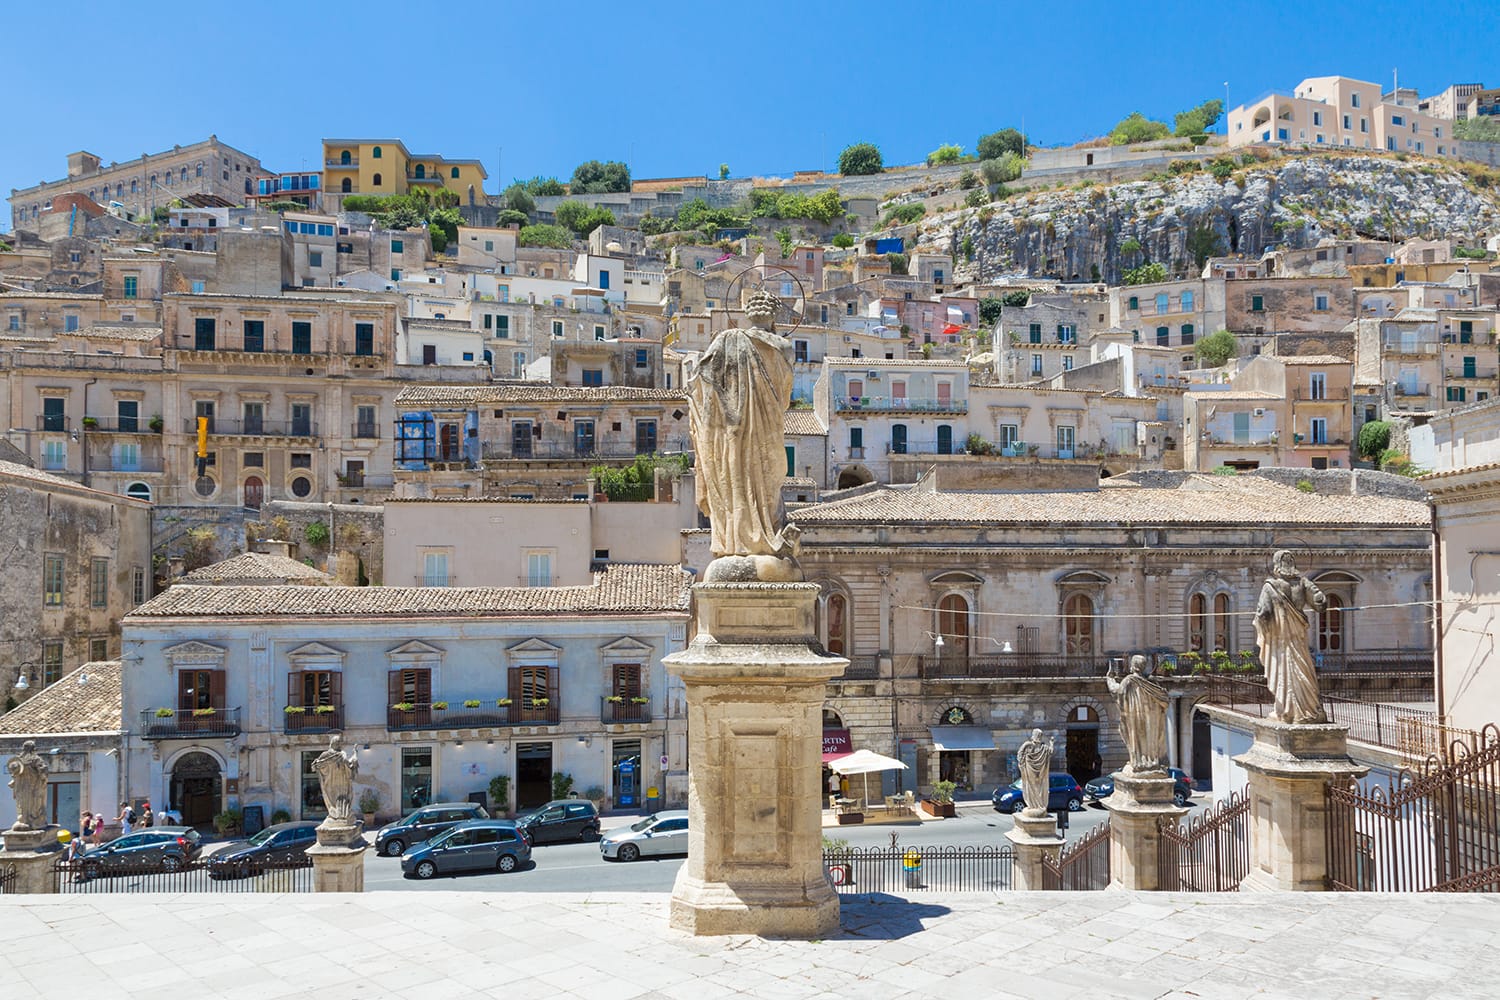 Modica (Sicily, Italy) - View of the ancient town